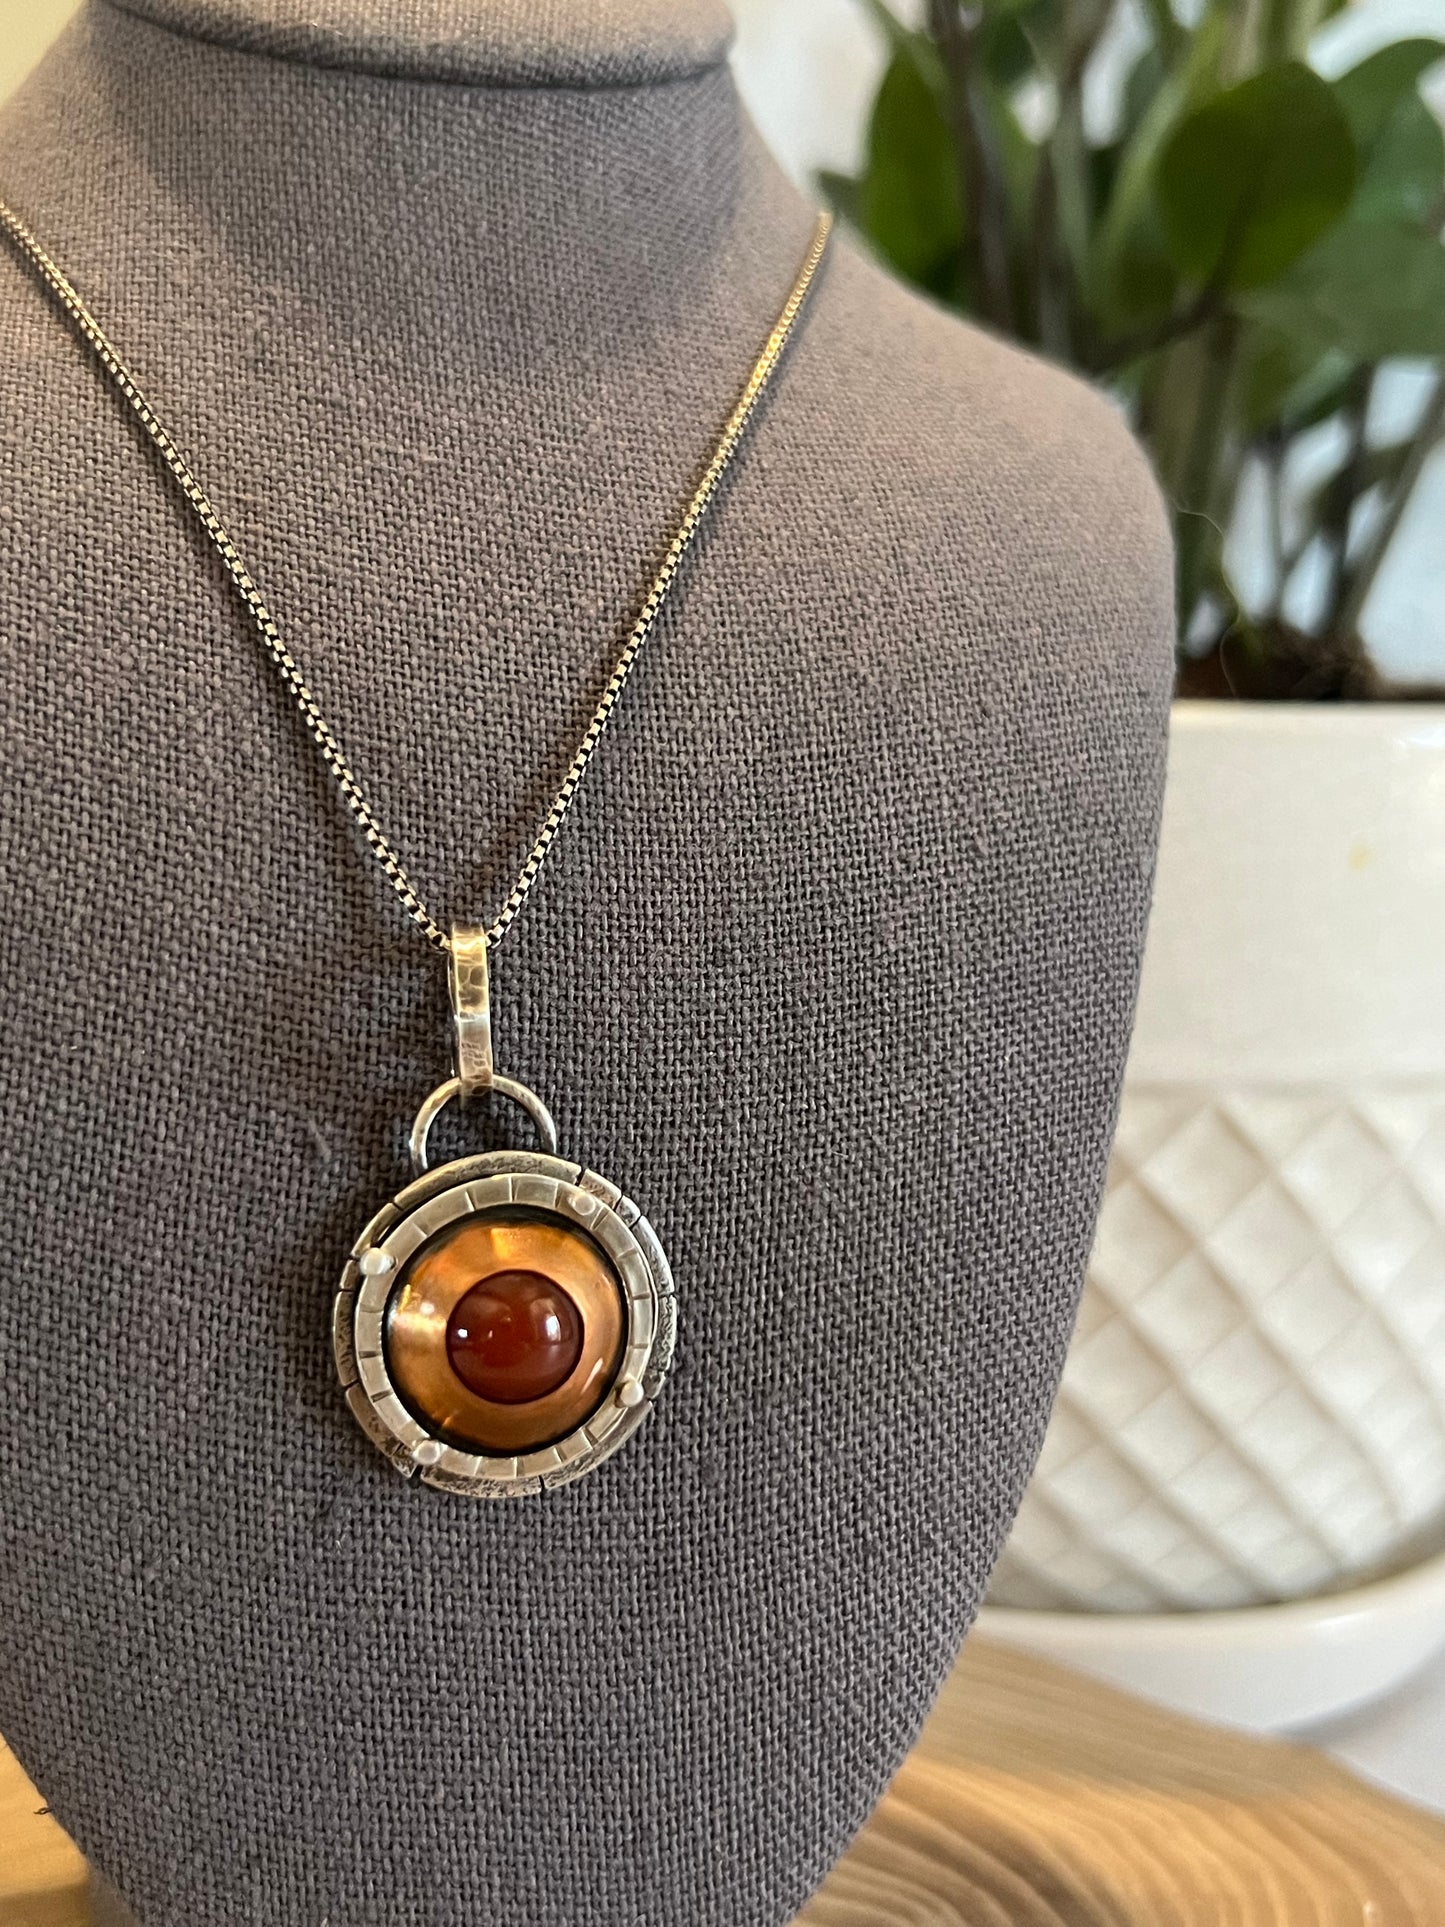 Copper carnelian adorned with sterling silver